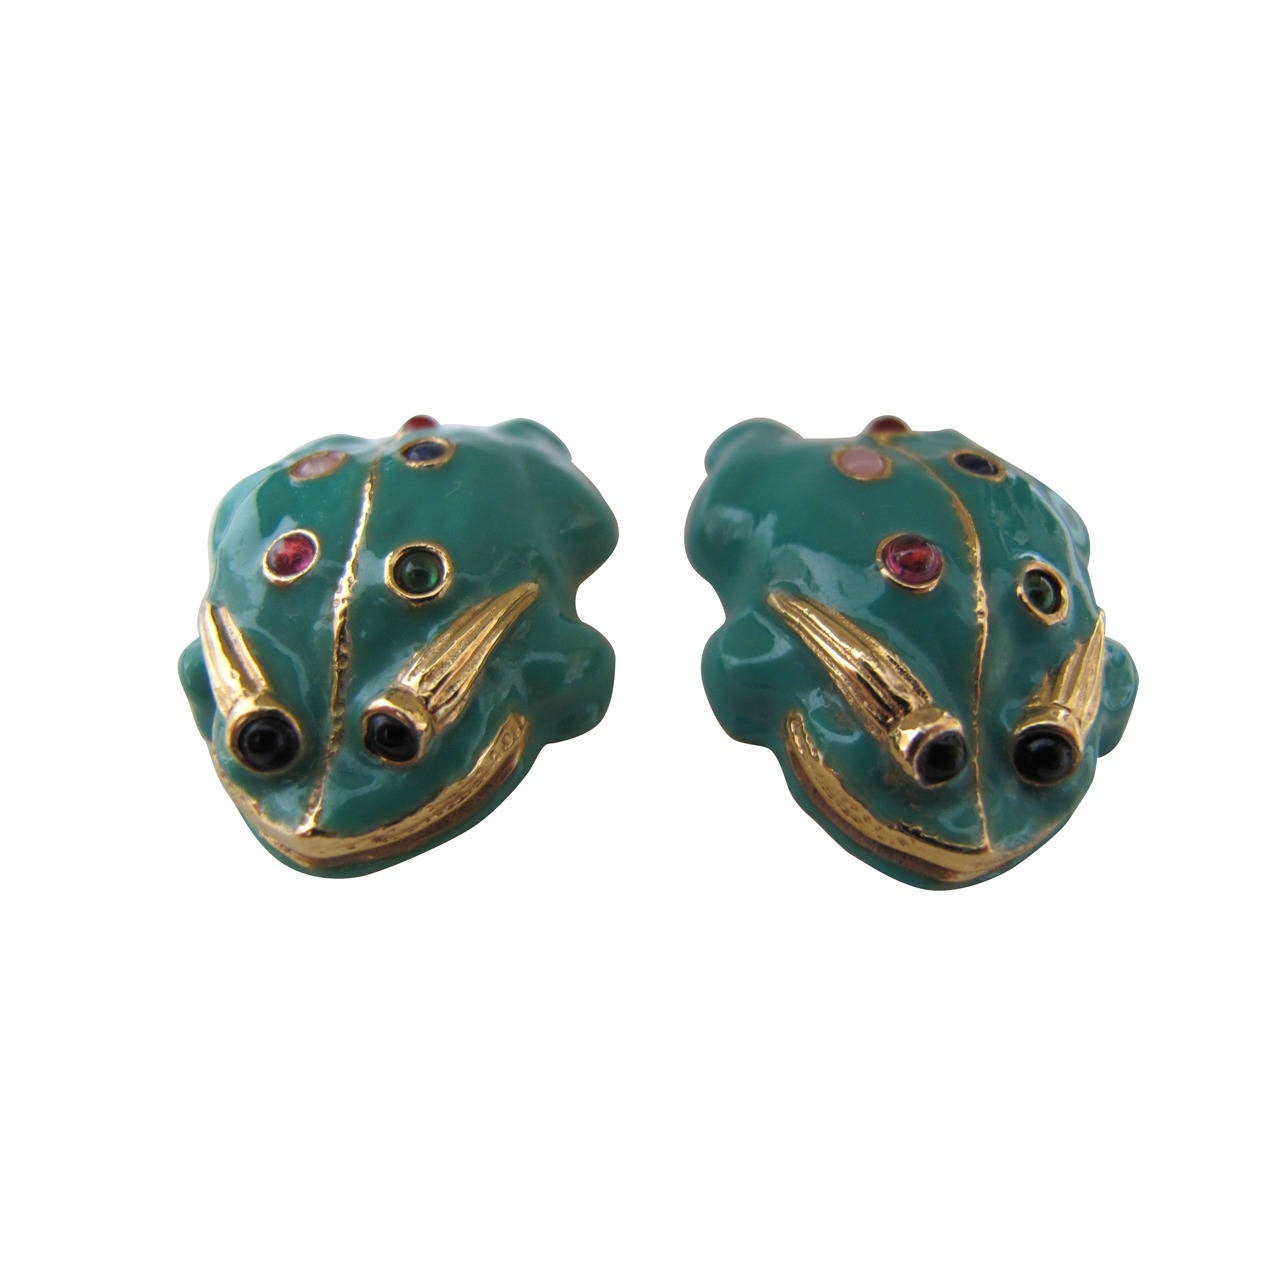 Judith Lieber Frog Clip-On Earrings with Semi Precious Stones